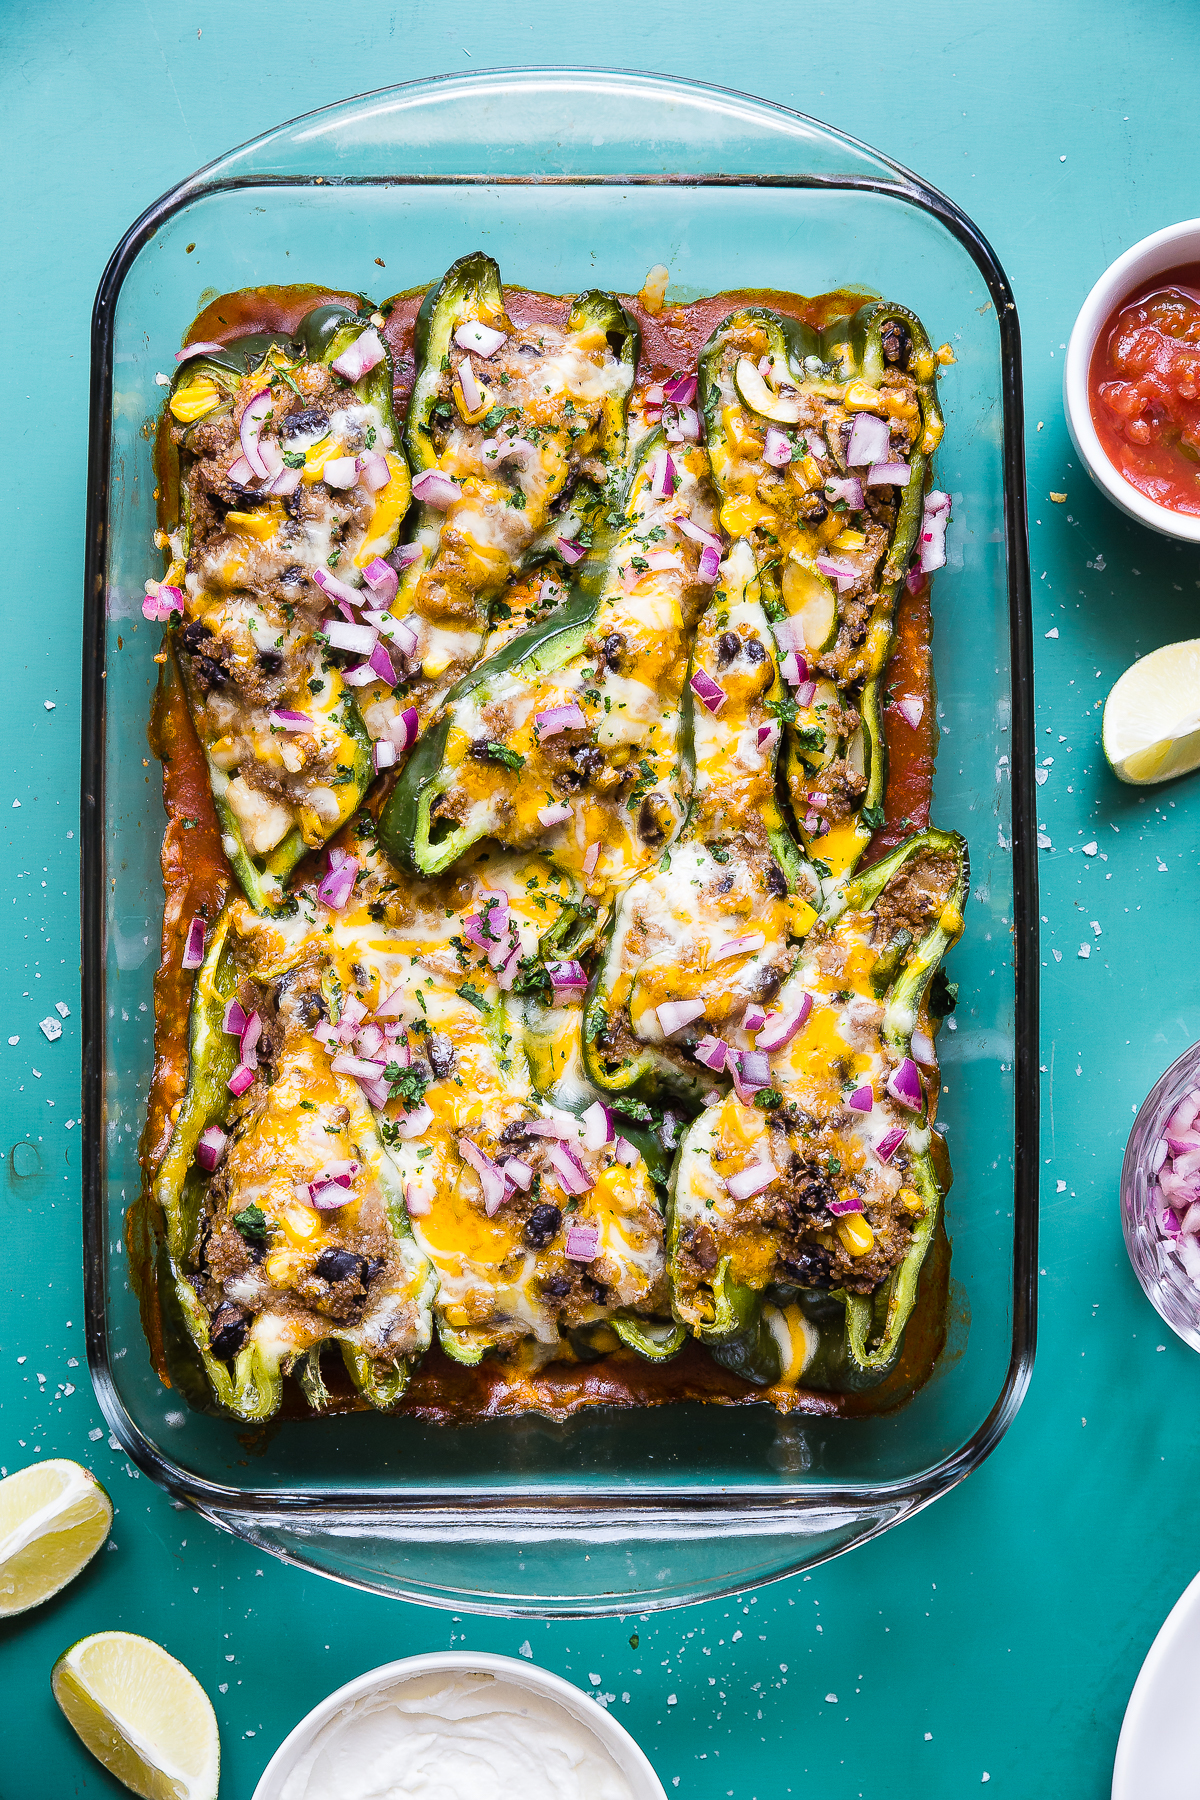 10 Vegetarian Casseroles to Bring to a Potluck